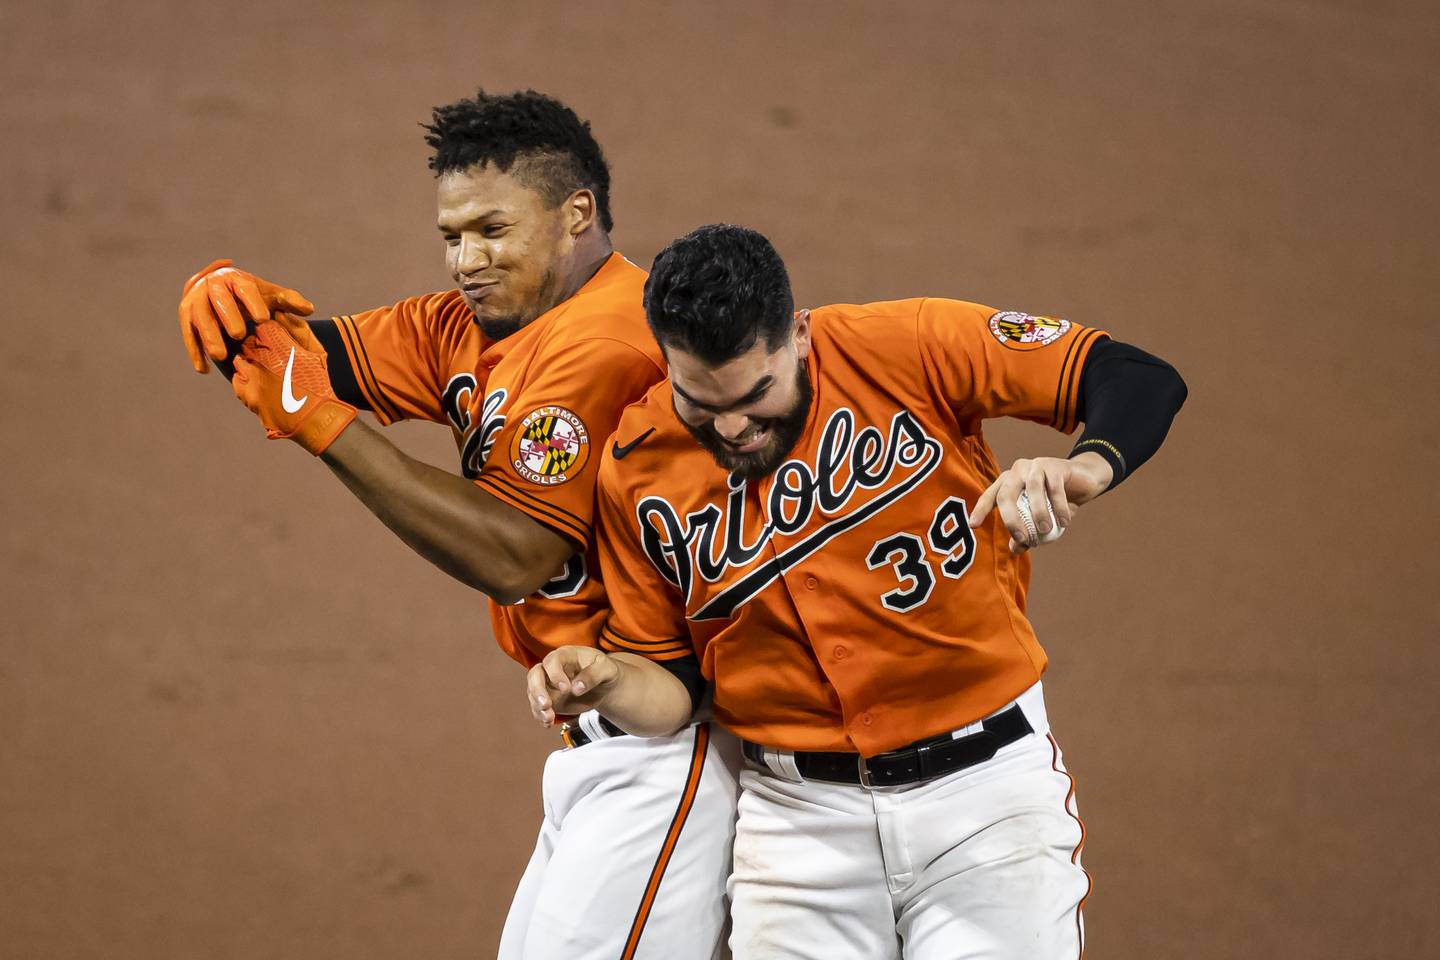 BALTIMORE, MD - AUGUST 22: Pedro Severino #28 of the Baltimore Orioles celebrates with Renato Nunez #39 after hitting in the game-winning run against the Boston Red Sox during the tenth inning at Oriole Park at Camden Yards on August 22, 2020 in Baltimore, Maryland. (Photo by Scott Taetsch/Getty Images)